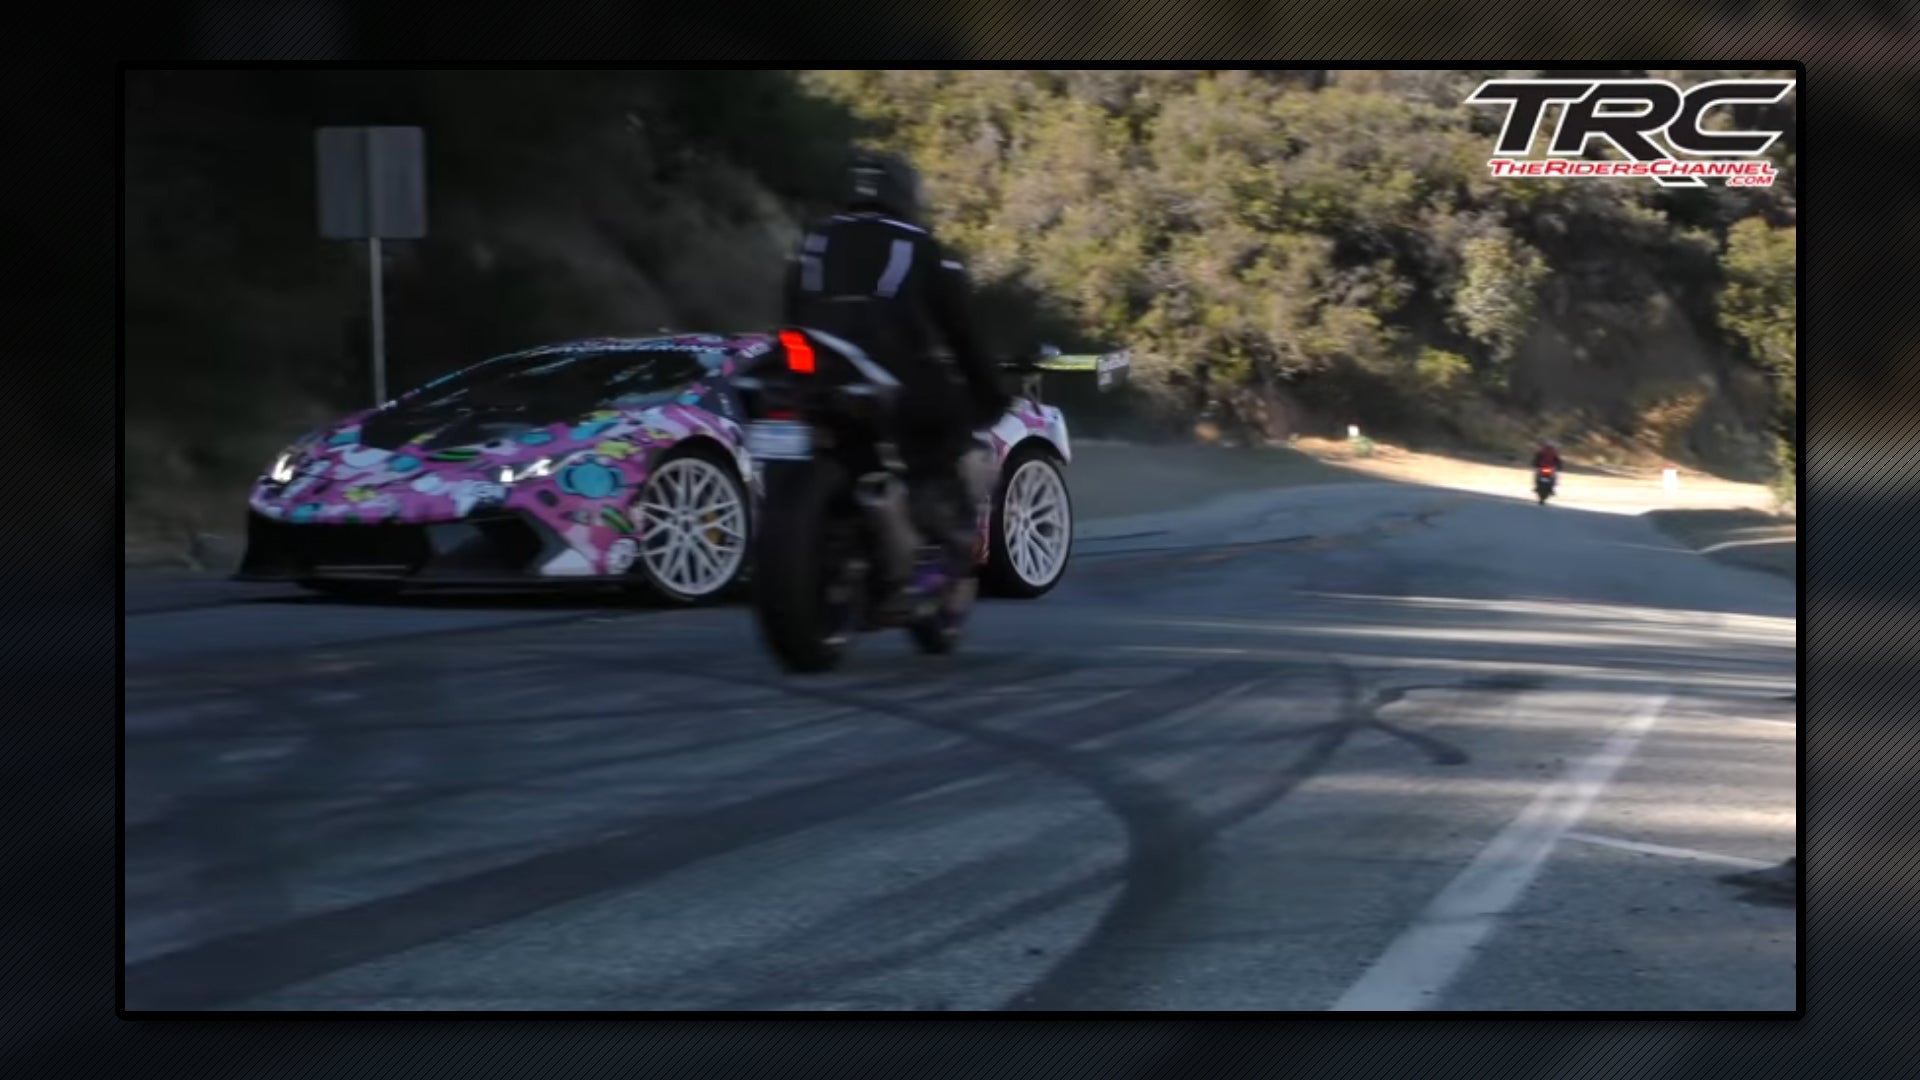 Watch a Lamborghini Huracan-Driving YouTuber Almost Kill a Motorcycle Rider